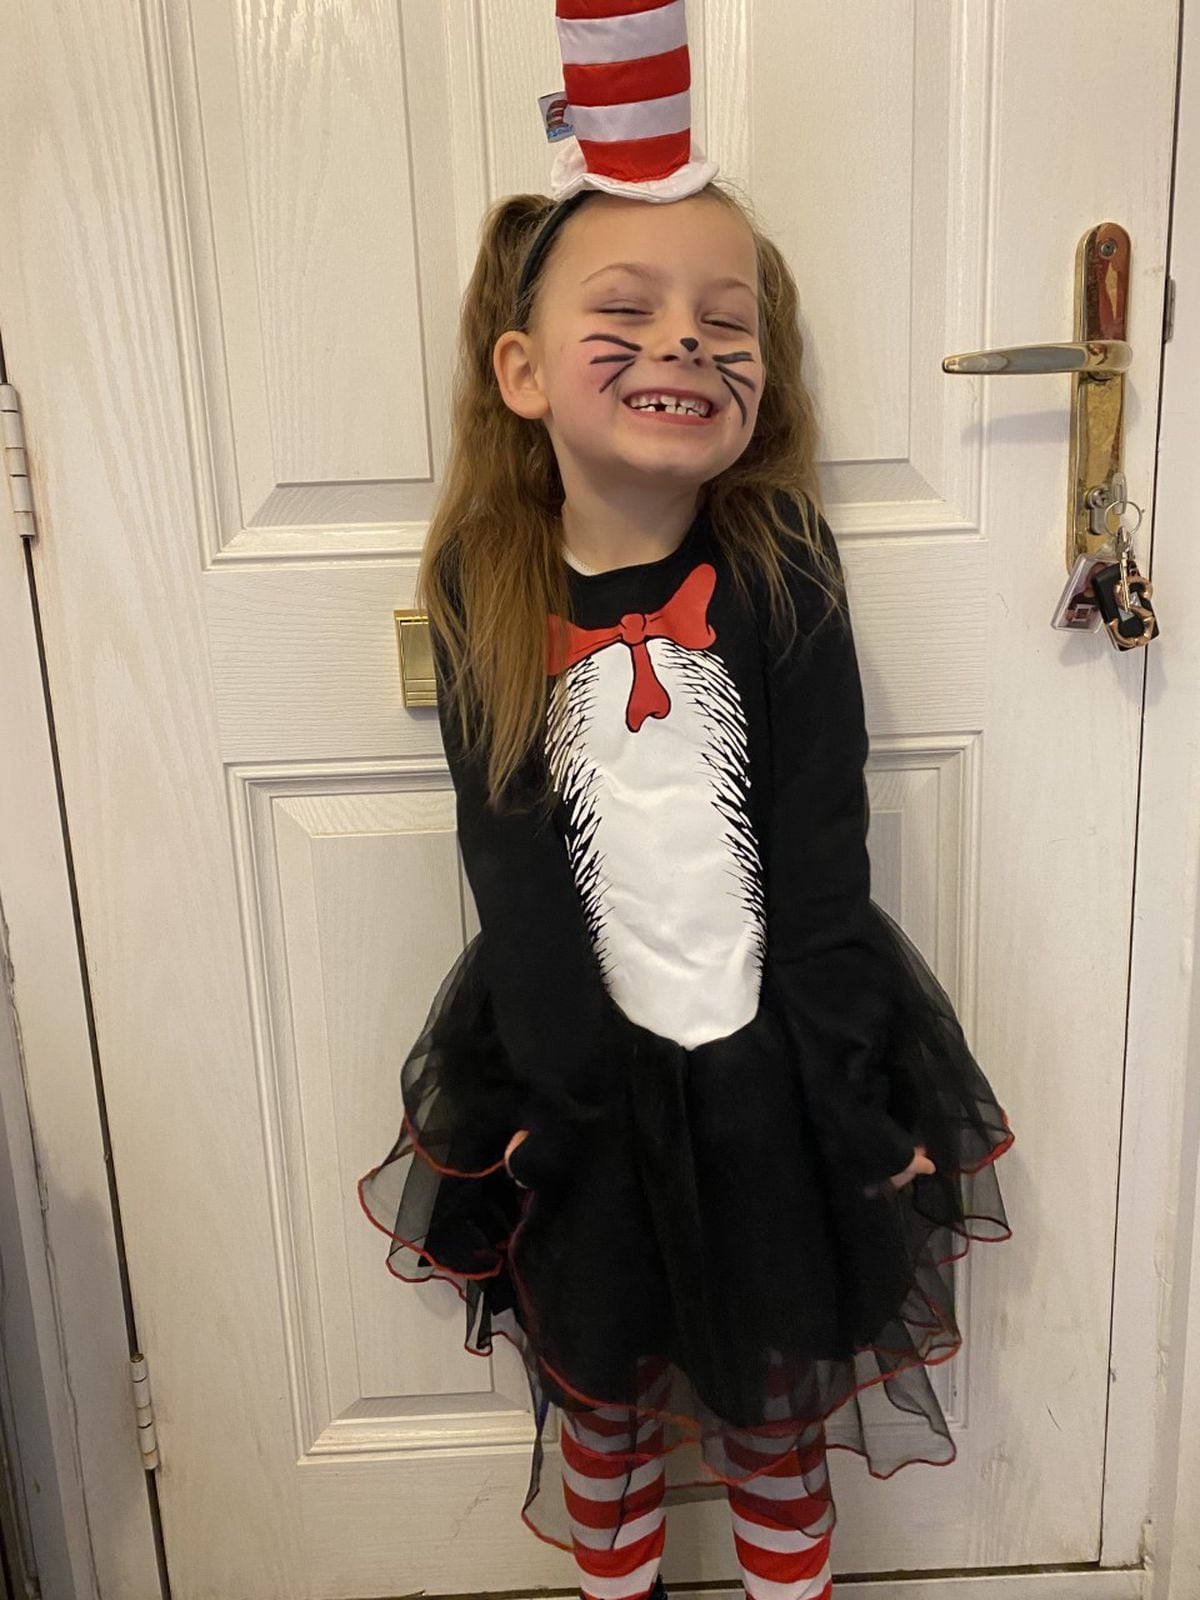 Darcie, aged 5, dressed up as The Cat in the Hat